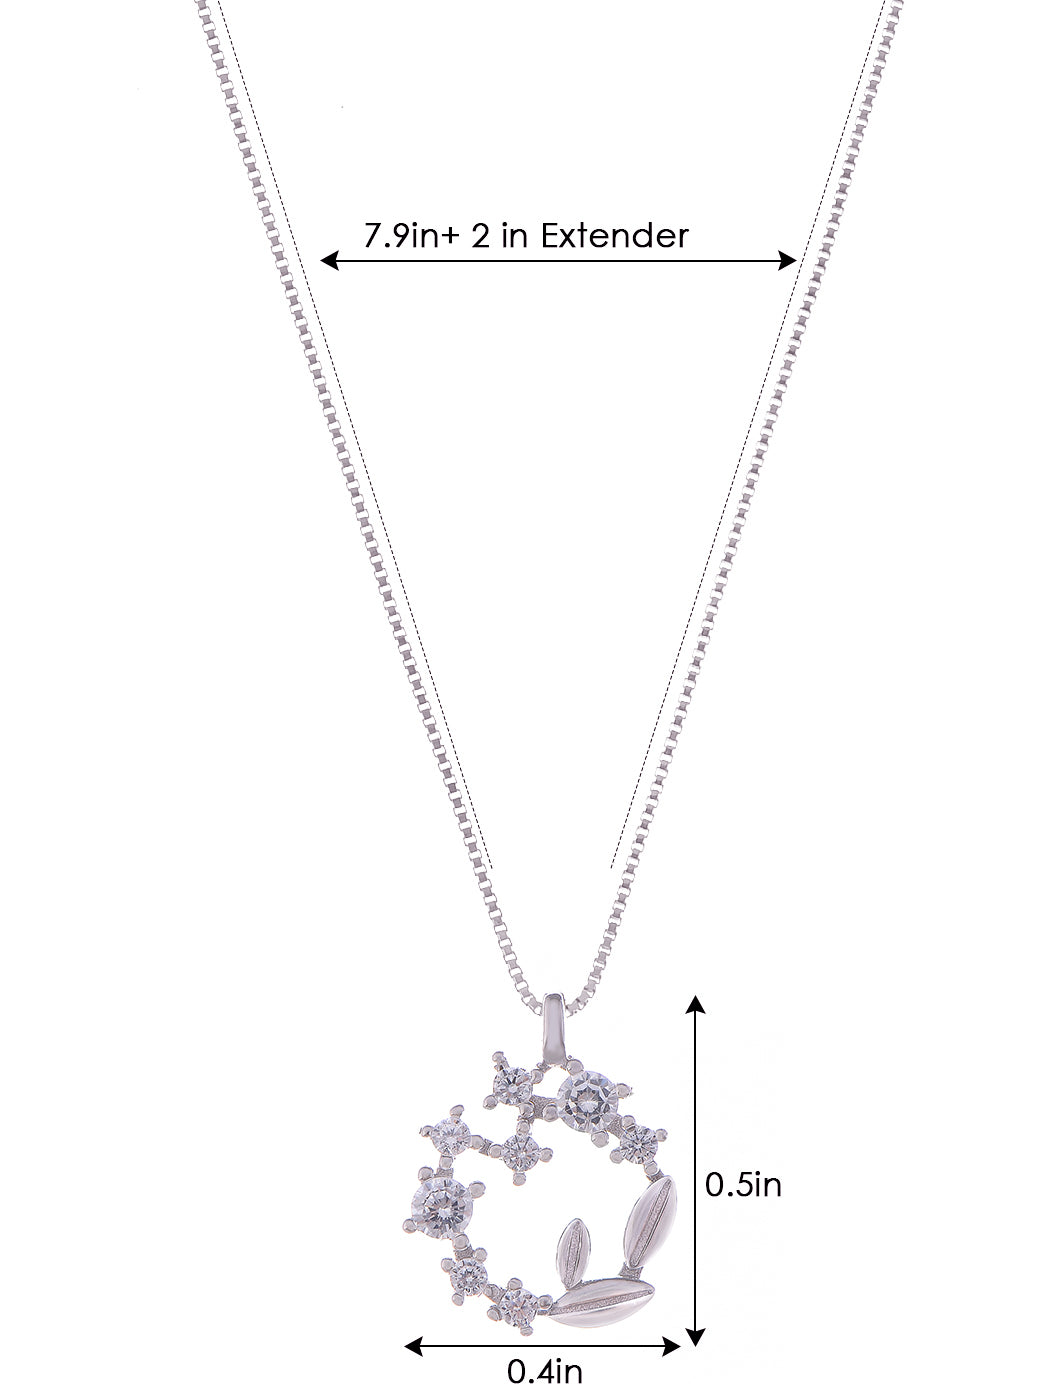 Alilang Wreath Pendant Necklace S925 Sterling Silver Necklace Glitzy Rhinestone Zircon Leaf Necklace Valentines Day Anniversary Jewelry Gift for Women Mother Wife